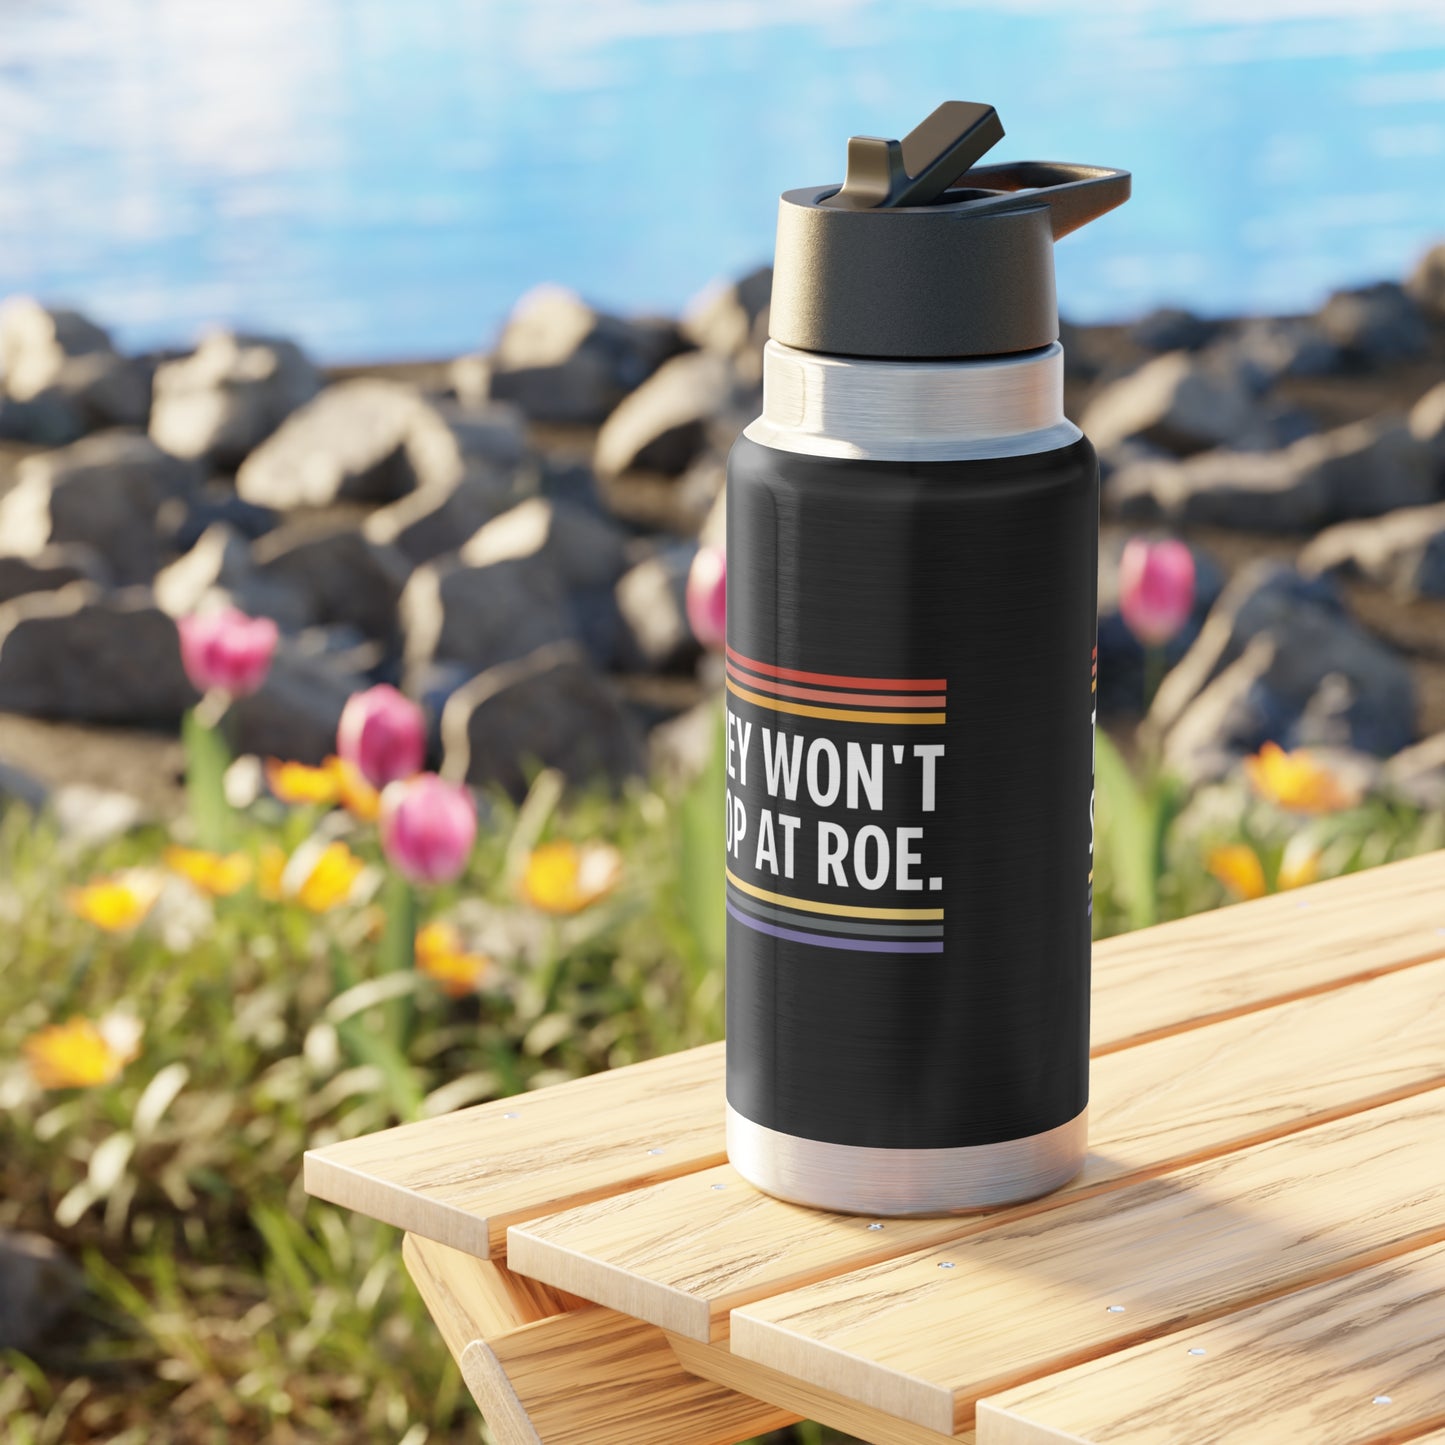 “They Won't Stop at Roe” 32 oz. Tumbler/Water Bottle